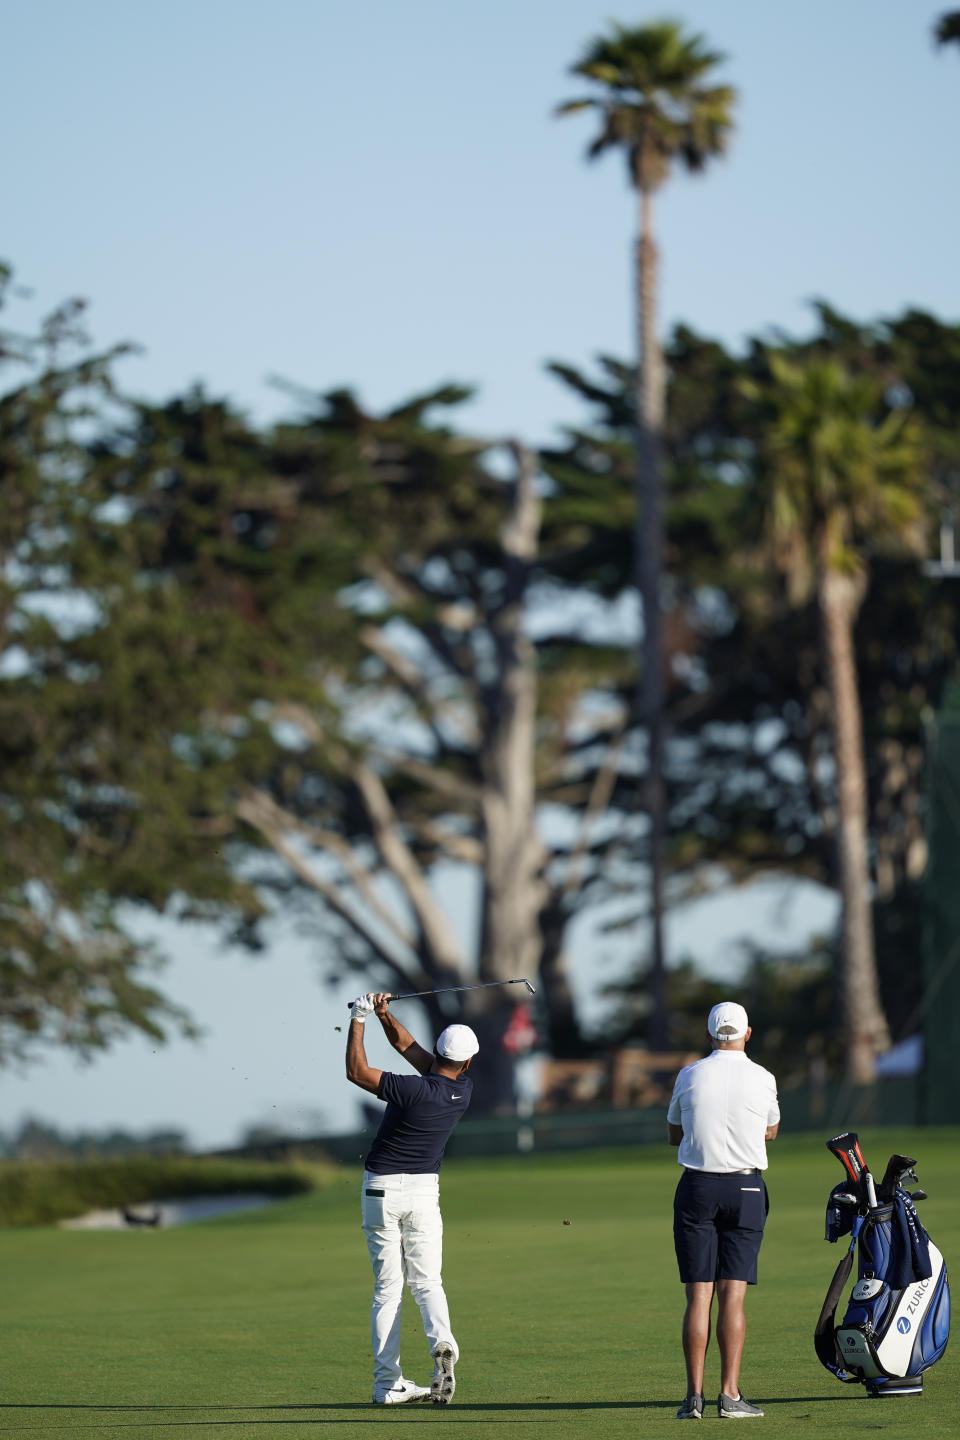 Jason Day, left, of Australia, hits from the fairway as caddie Steve Williams watches on the 13th hole during a practice round for the U.S. Open Championship golf tournament Tuesday, June 11, 2019, in Pebble Beach, Calif. (AP Photo/David J. Phillip)